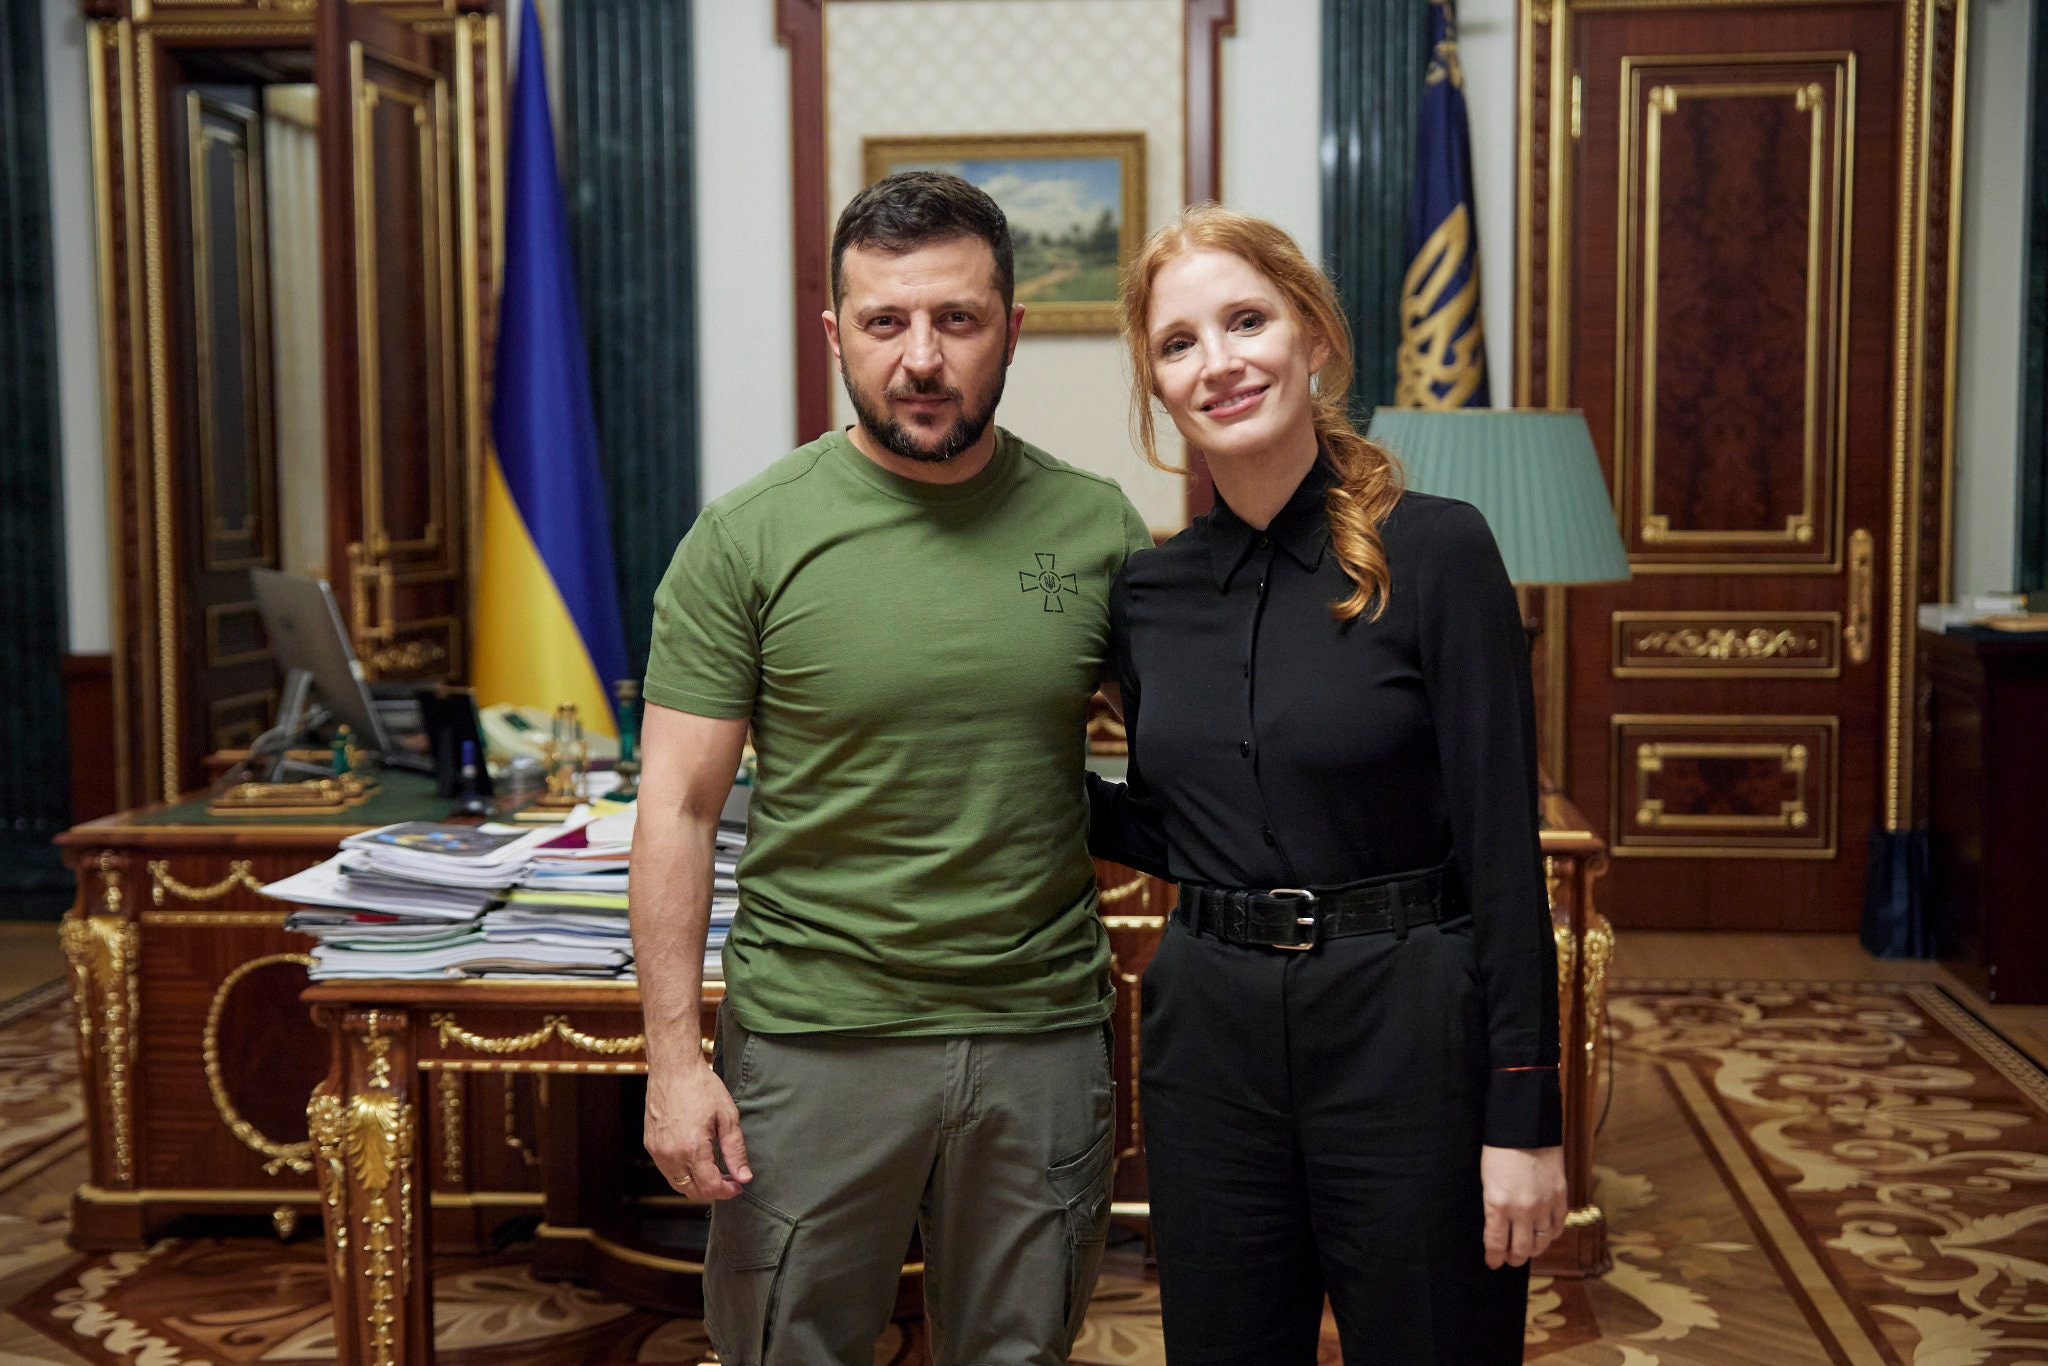 Actress Jessica Chastain meets with Volodymyr Zelenskyy in Ukraine